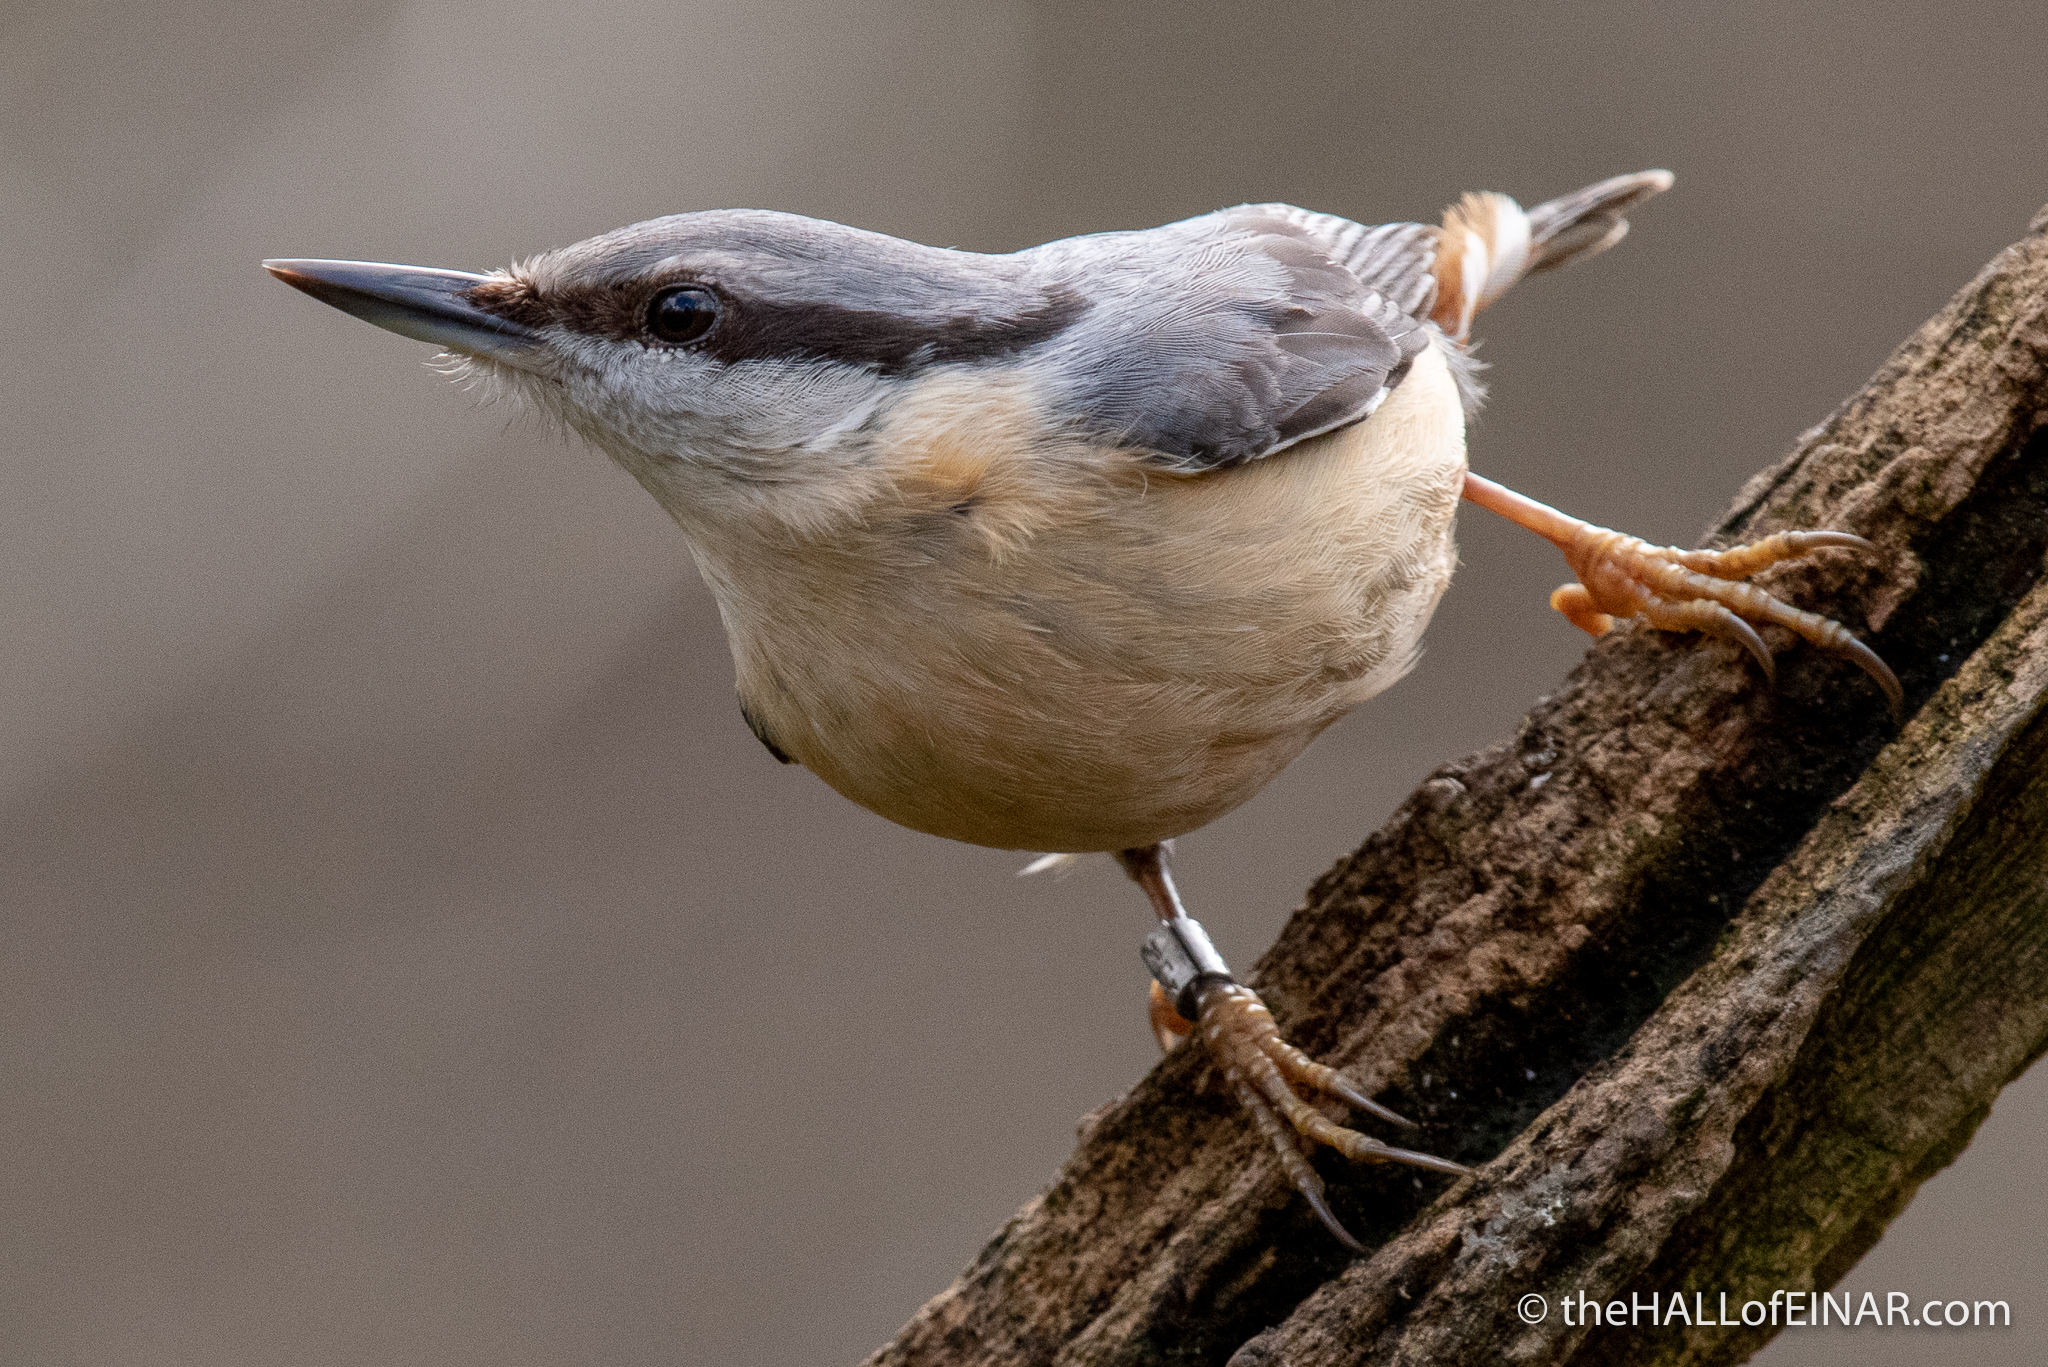 Nuthatch - The Hall of Einar - photograph (c) David Bailey (not the)